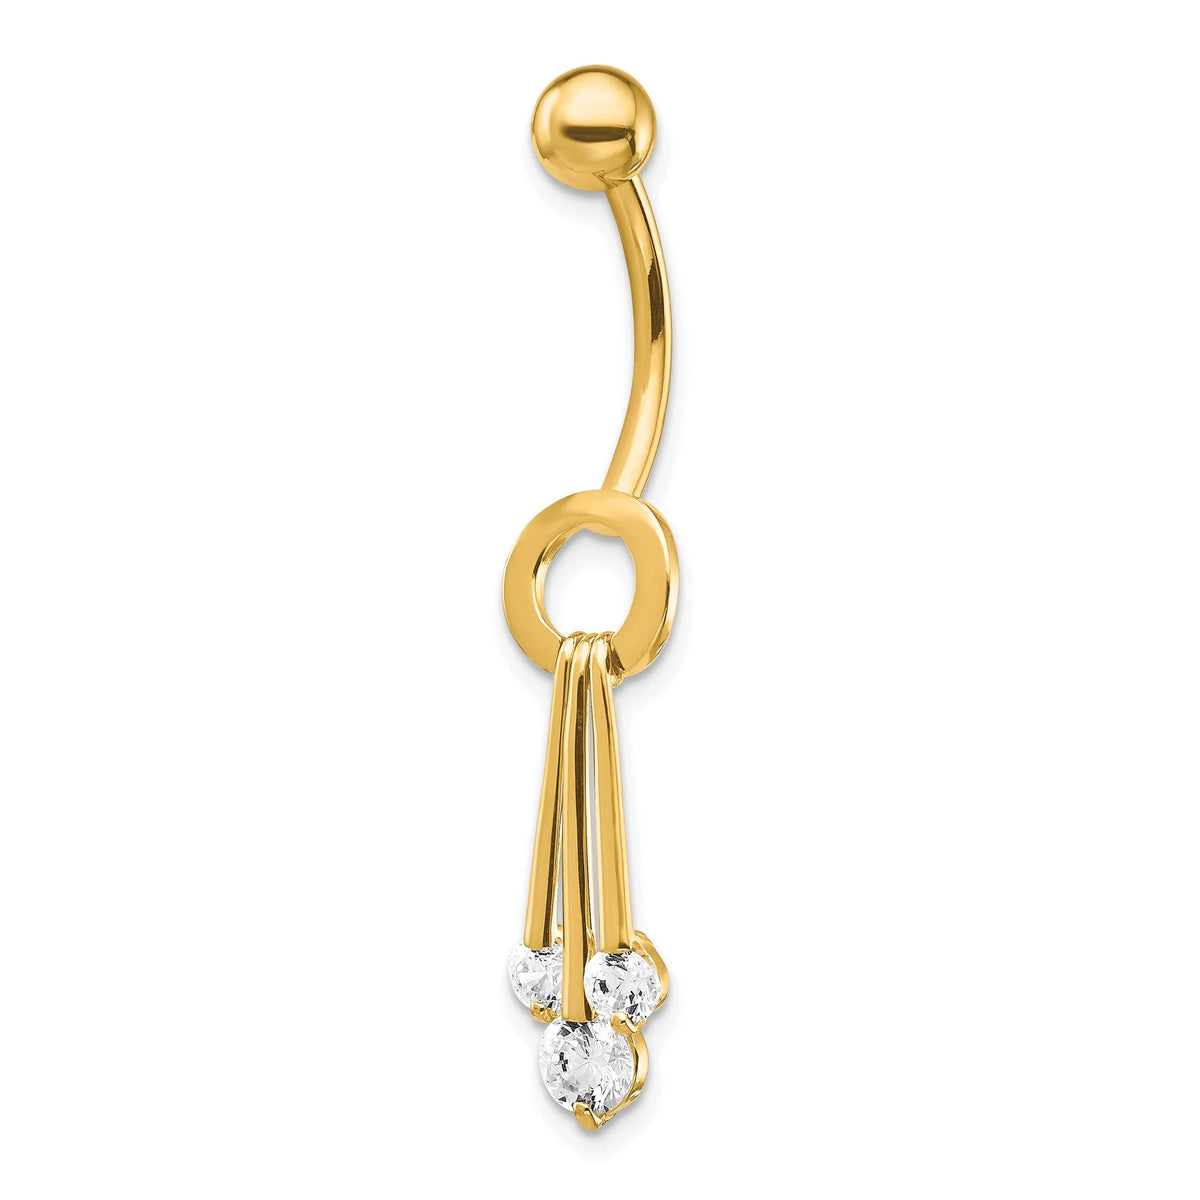 10k Yellow Gold Dangly Belly Ring with CZ Cubic Zirconia / 10k Belly Button Ring / Gold Navel Ring / Belly Ring Real Gold Gift Box Included